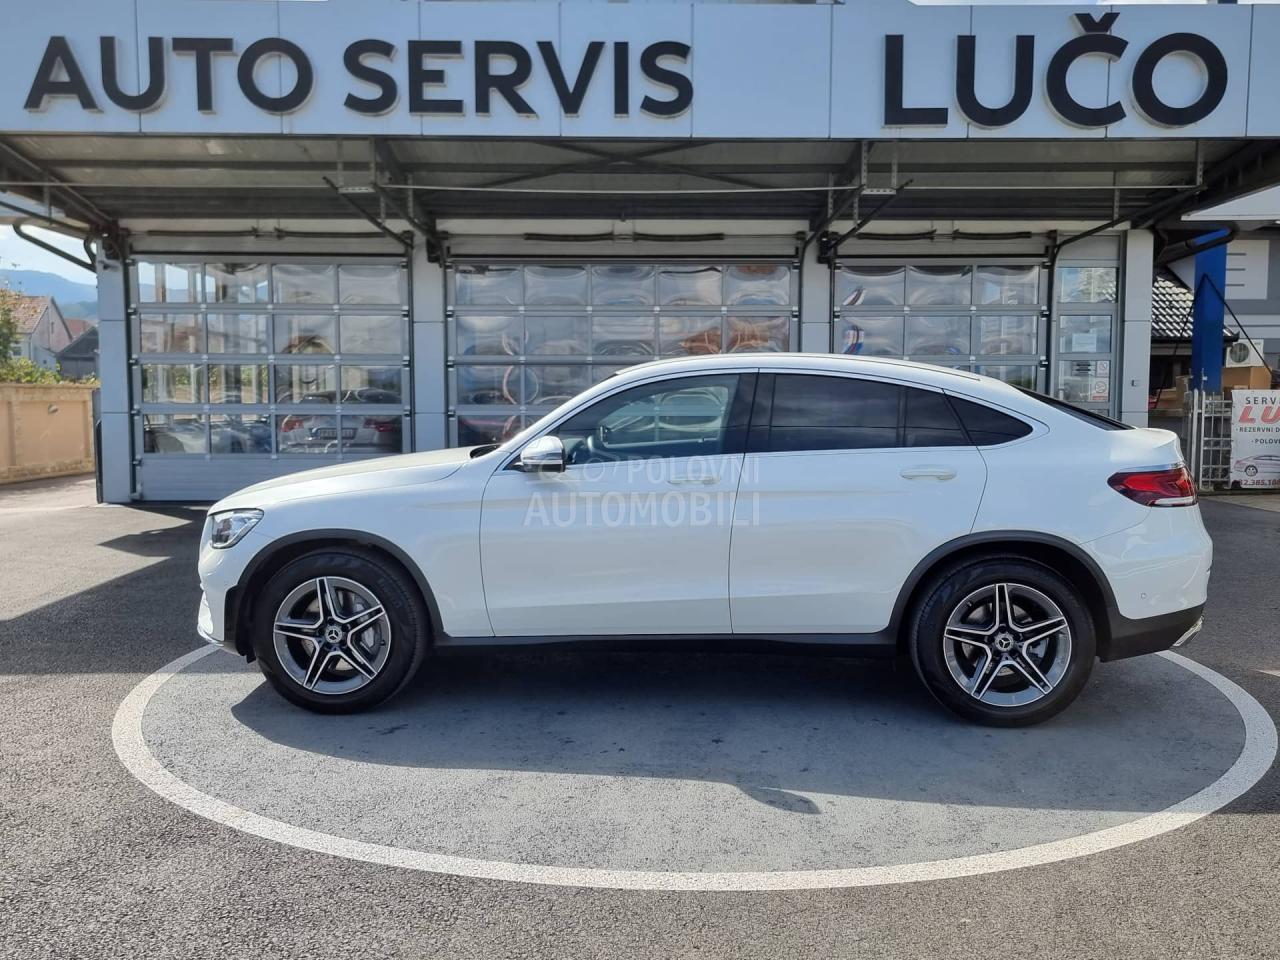 Mercedes Benz GLC 200 COUPE/AMG/LINE/LED